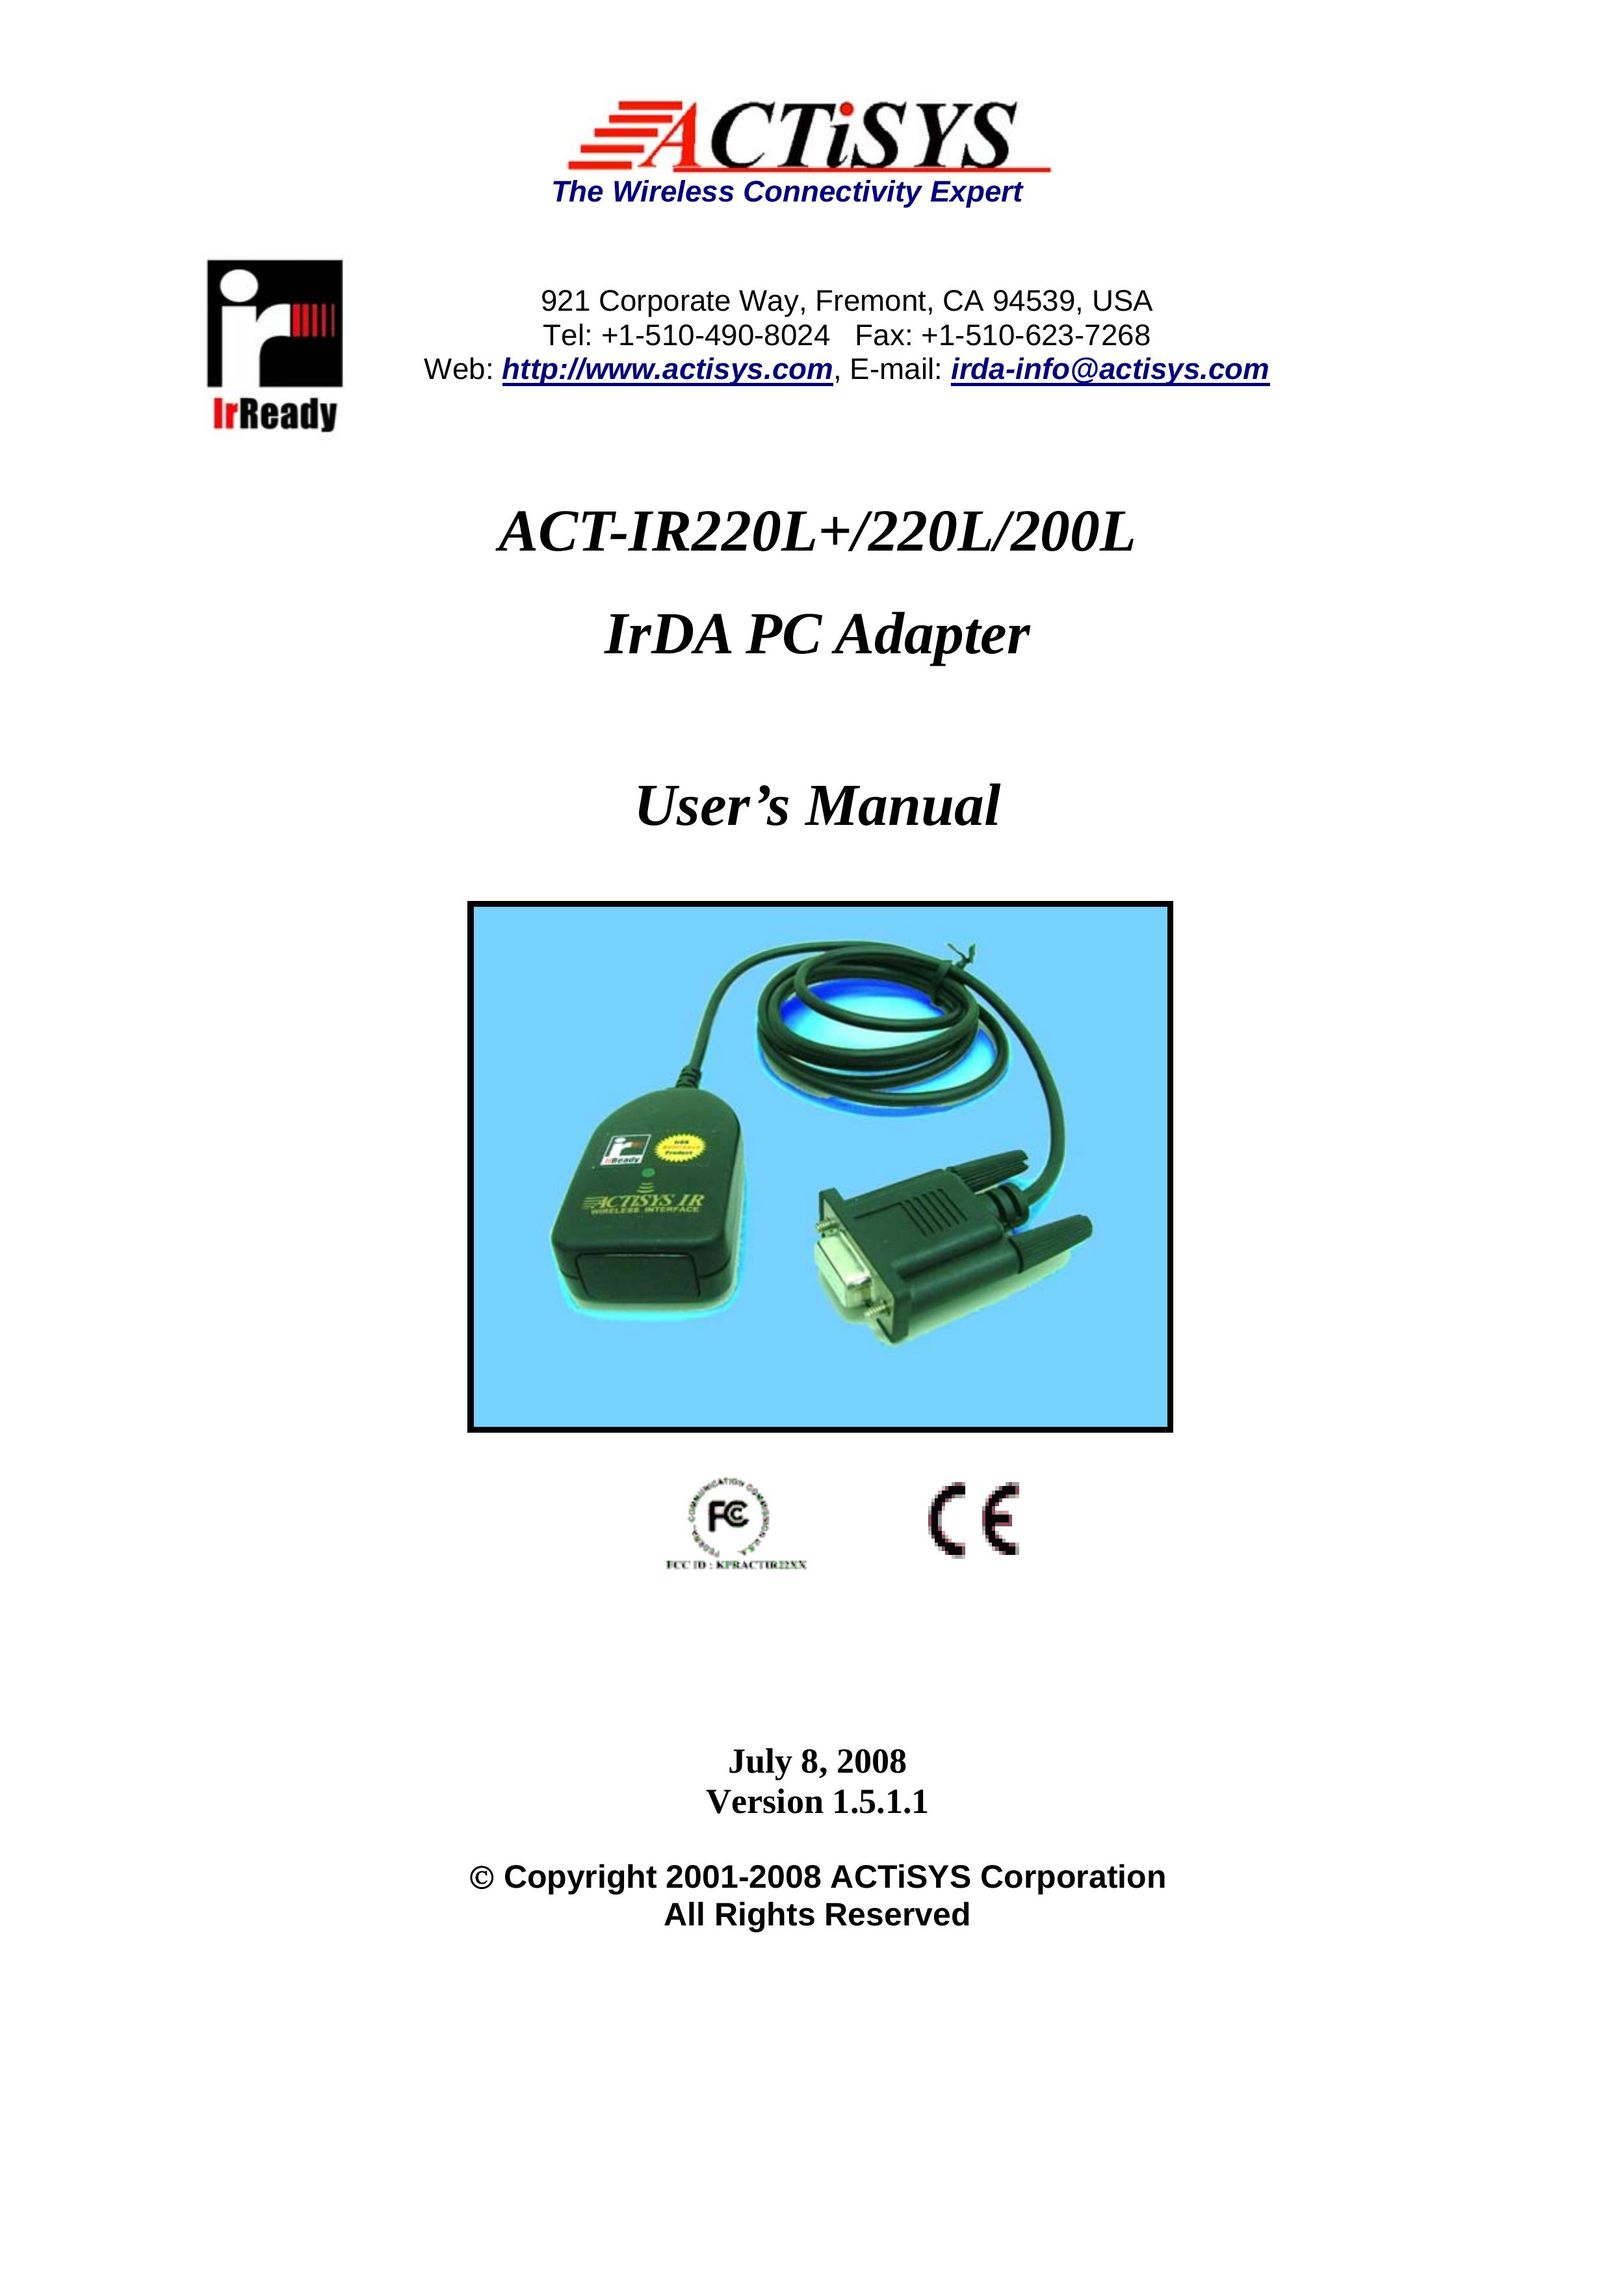 ACTiSYS ACT-IR220L+/220L/200L Network Card User Manual